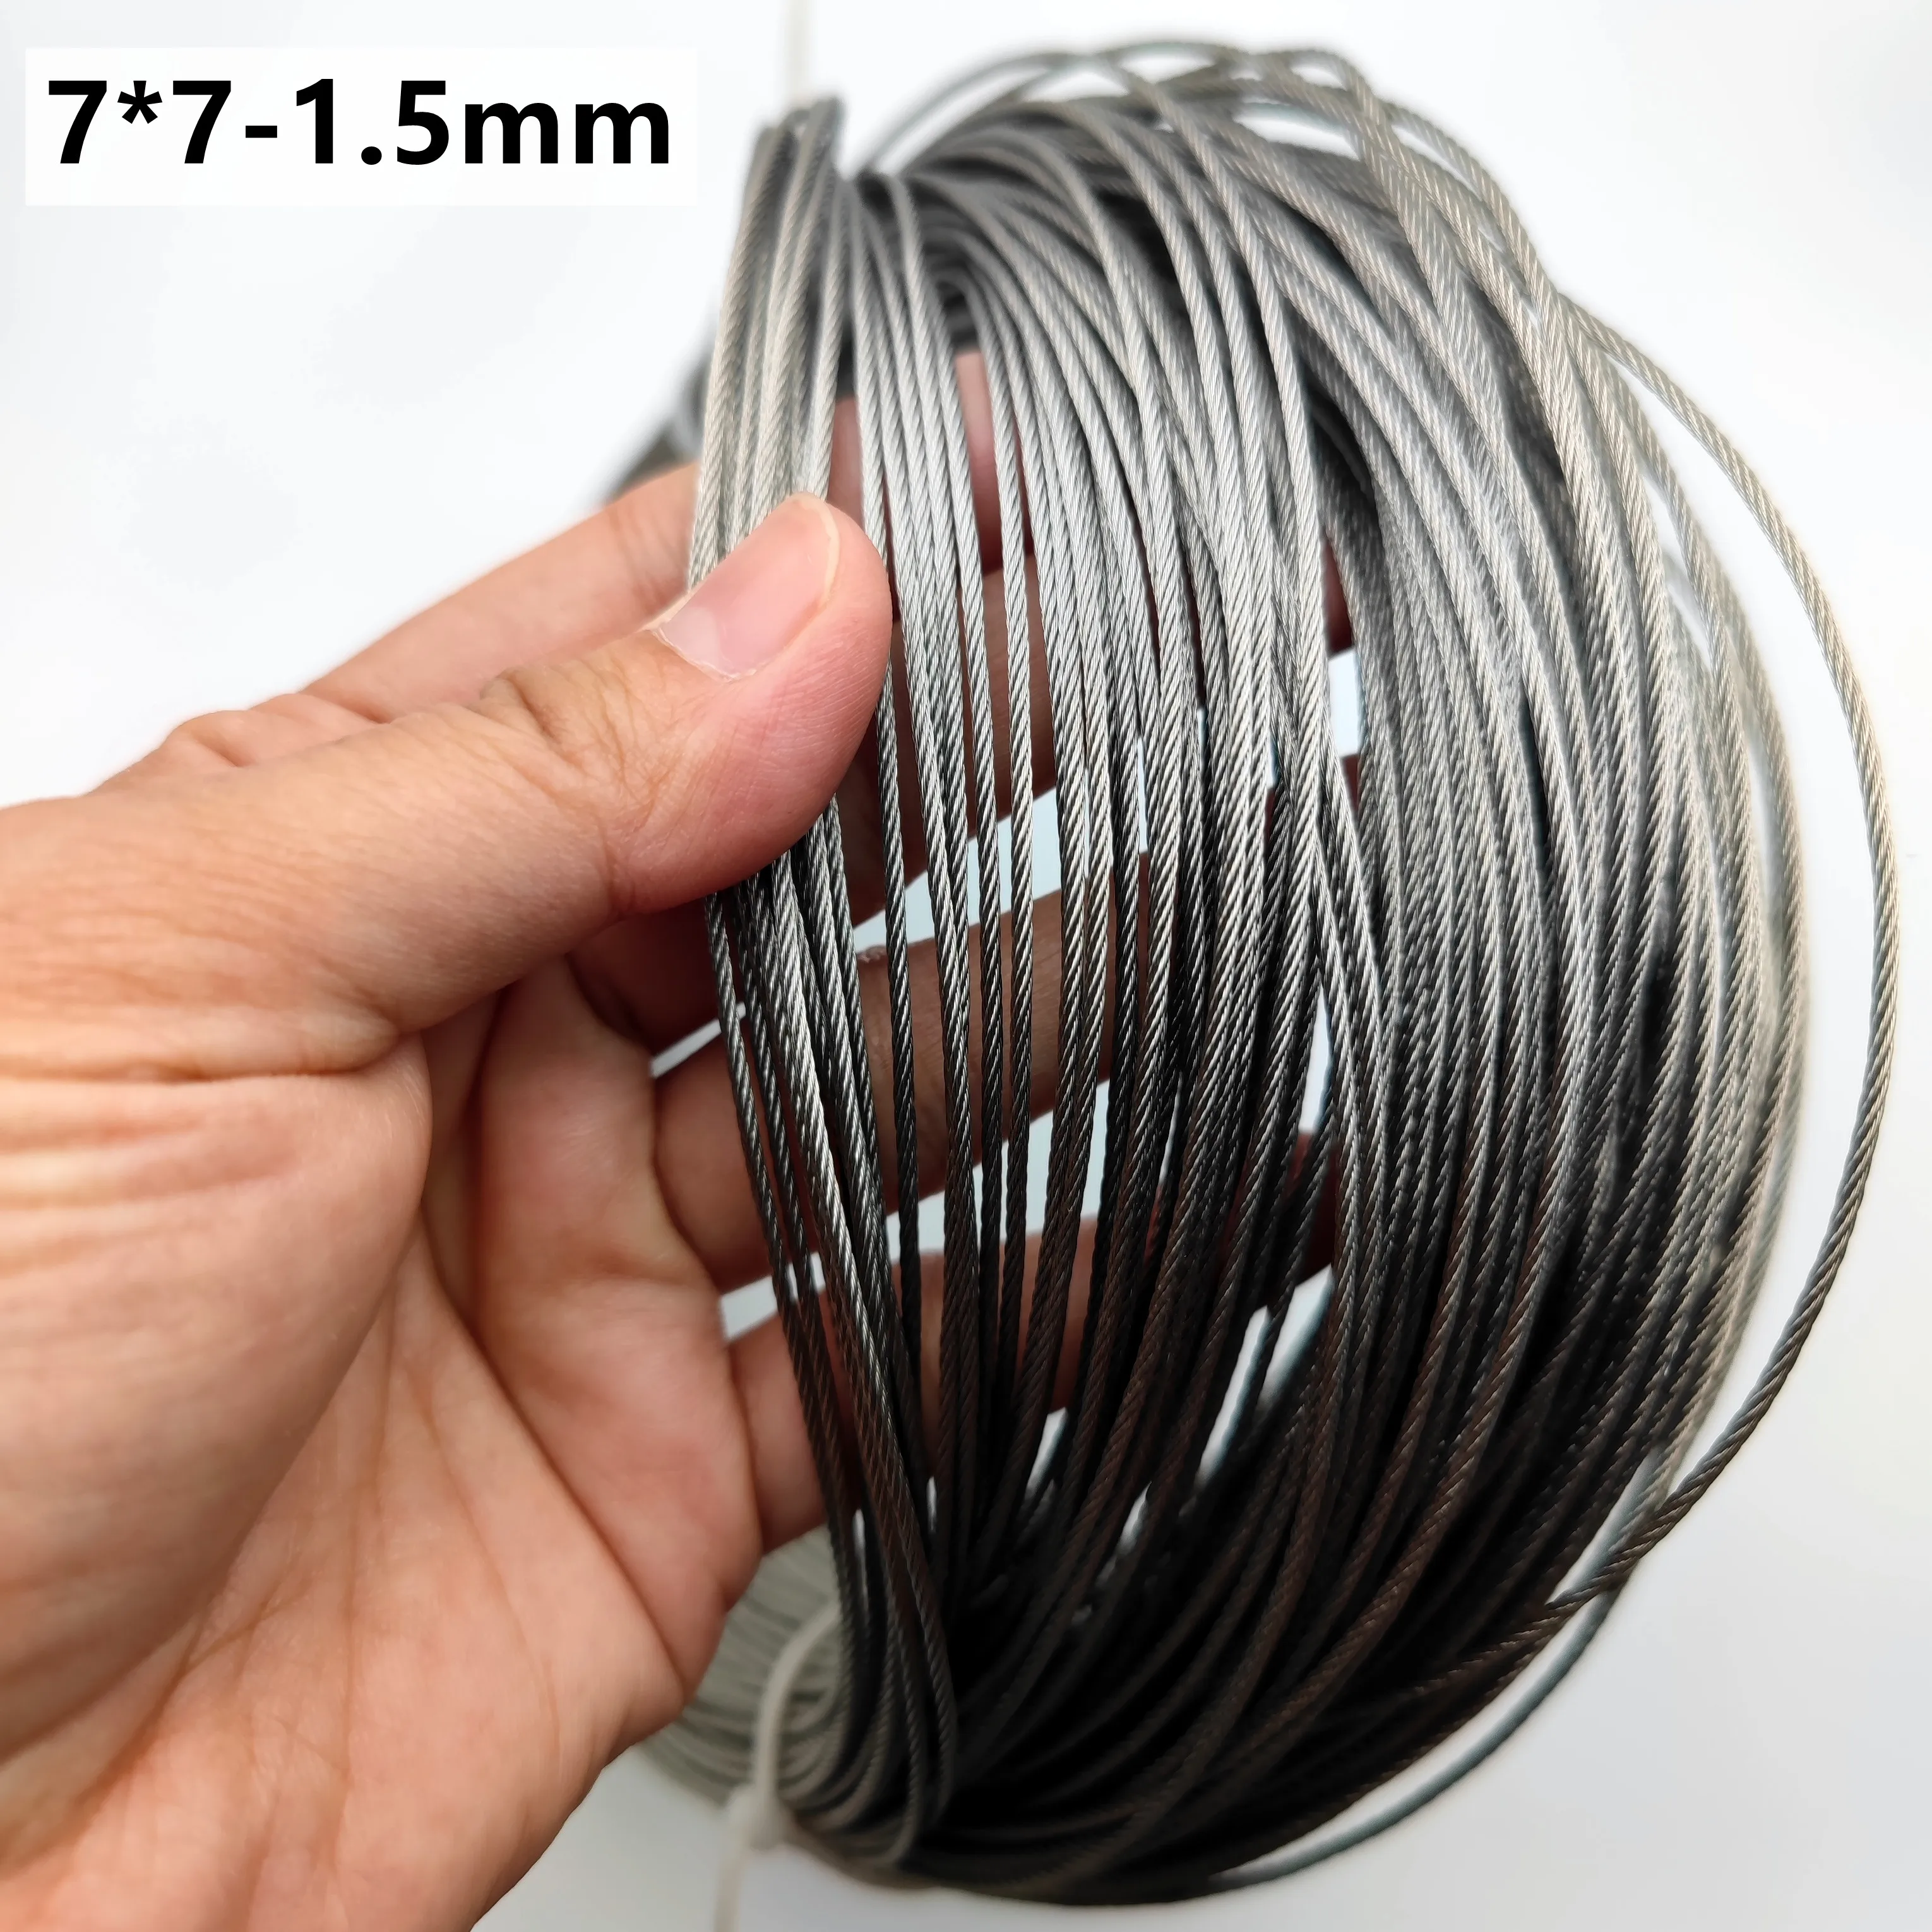 50M/100M/200M 1.5mm Diameter 7X7 Construction 304 Stainless steel Wire rope Alambre Softer Fishing Lifting Cable